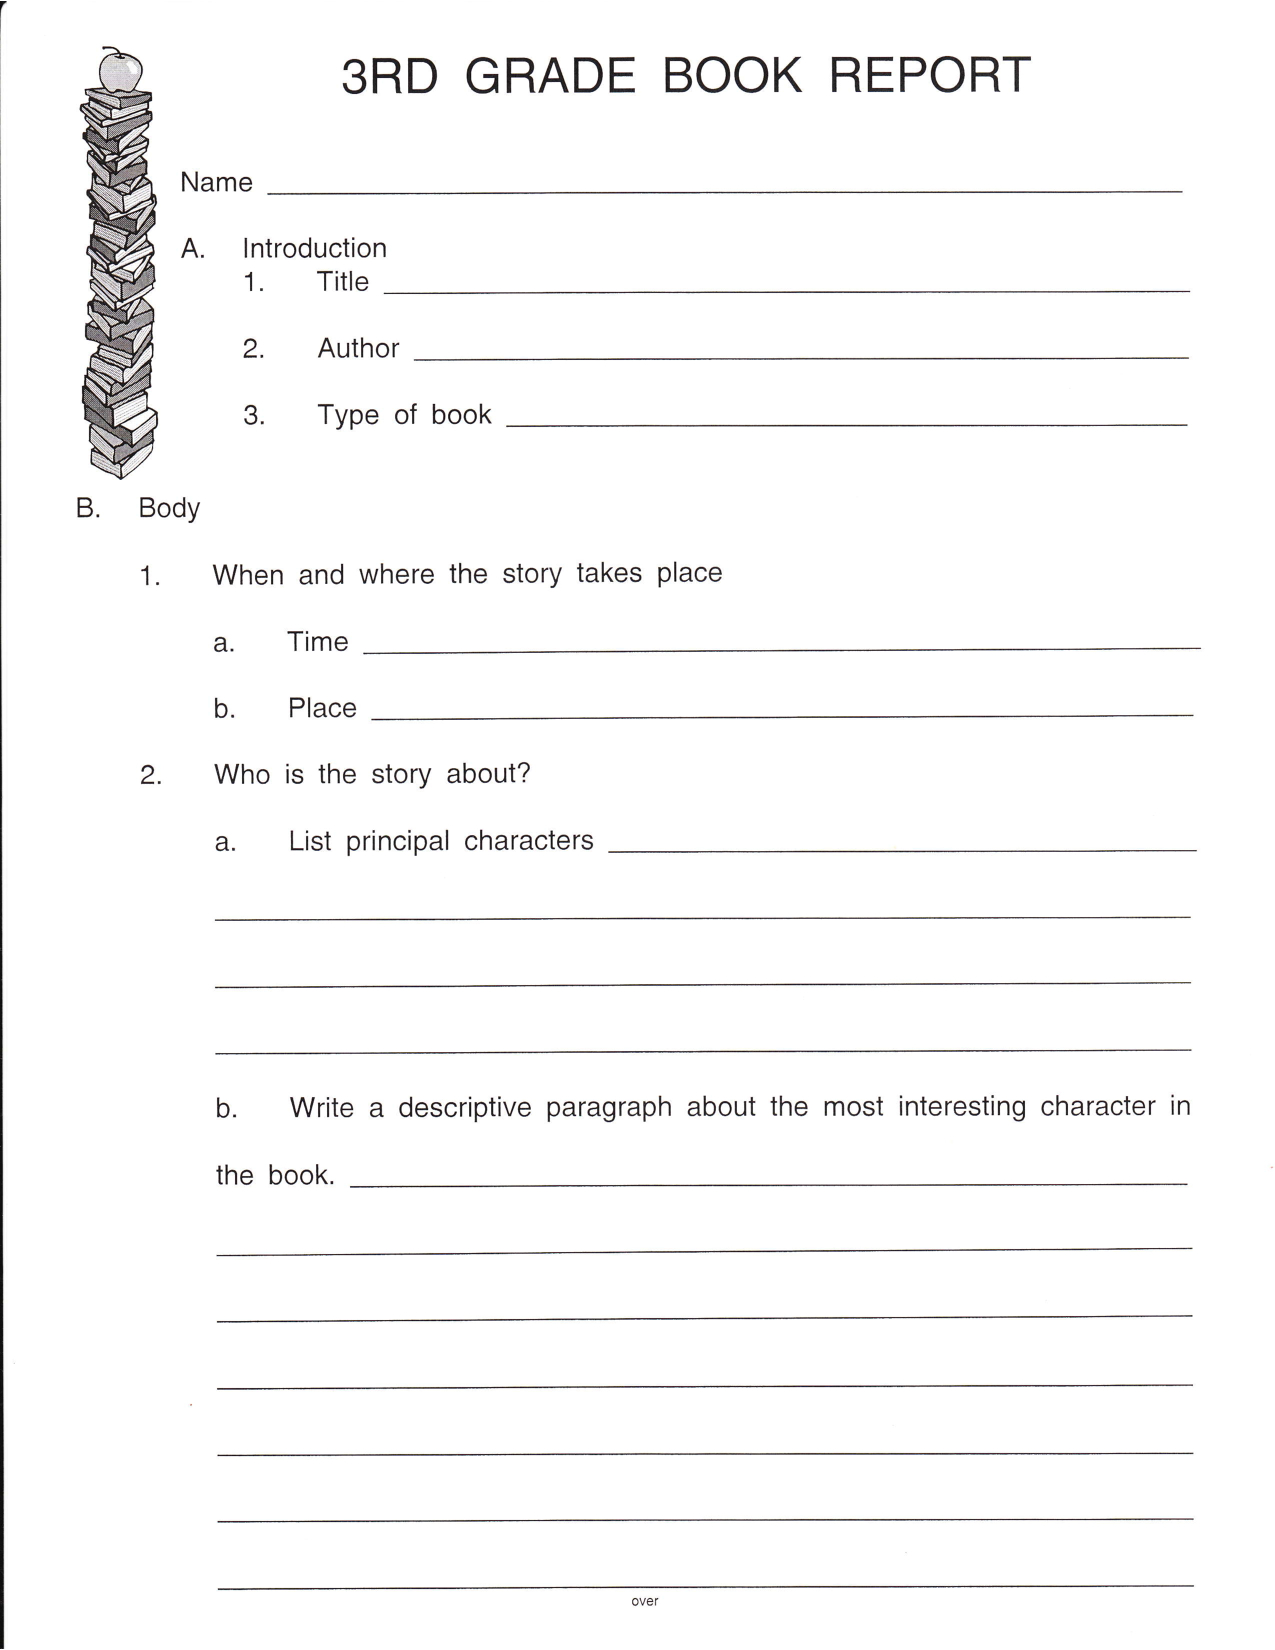 Pinshelena Schweitzer On Classroom Reading | Book Report - Free Printable Book Report Forms For Second Grade